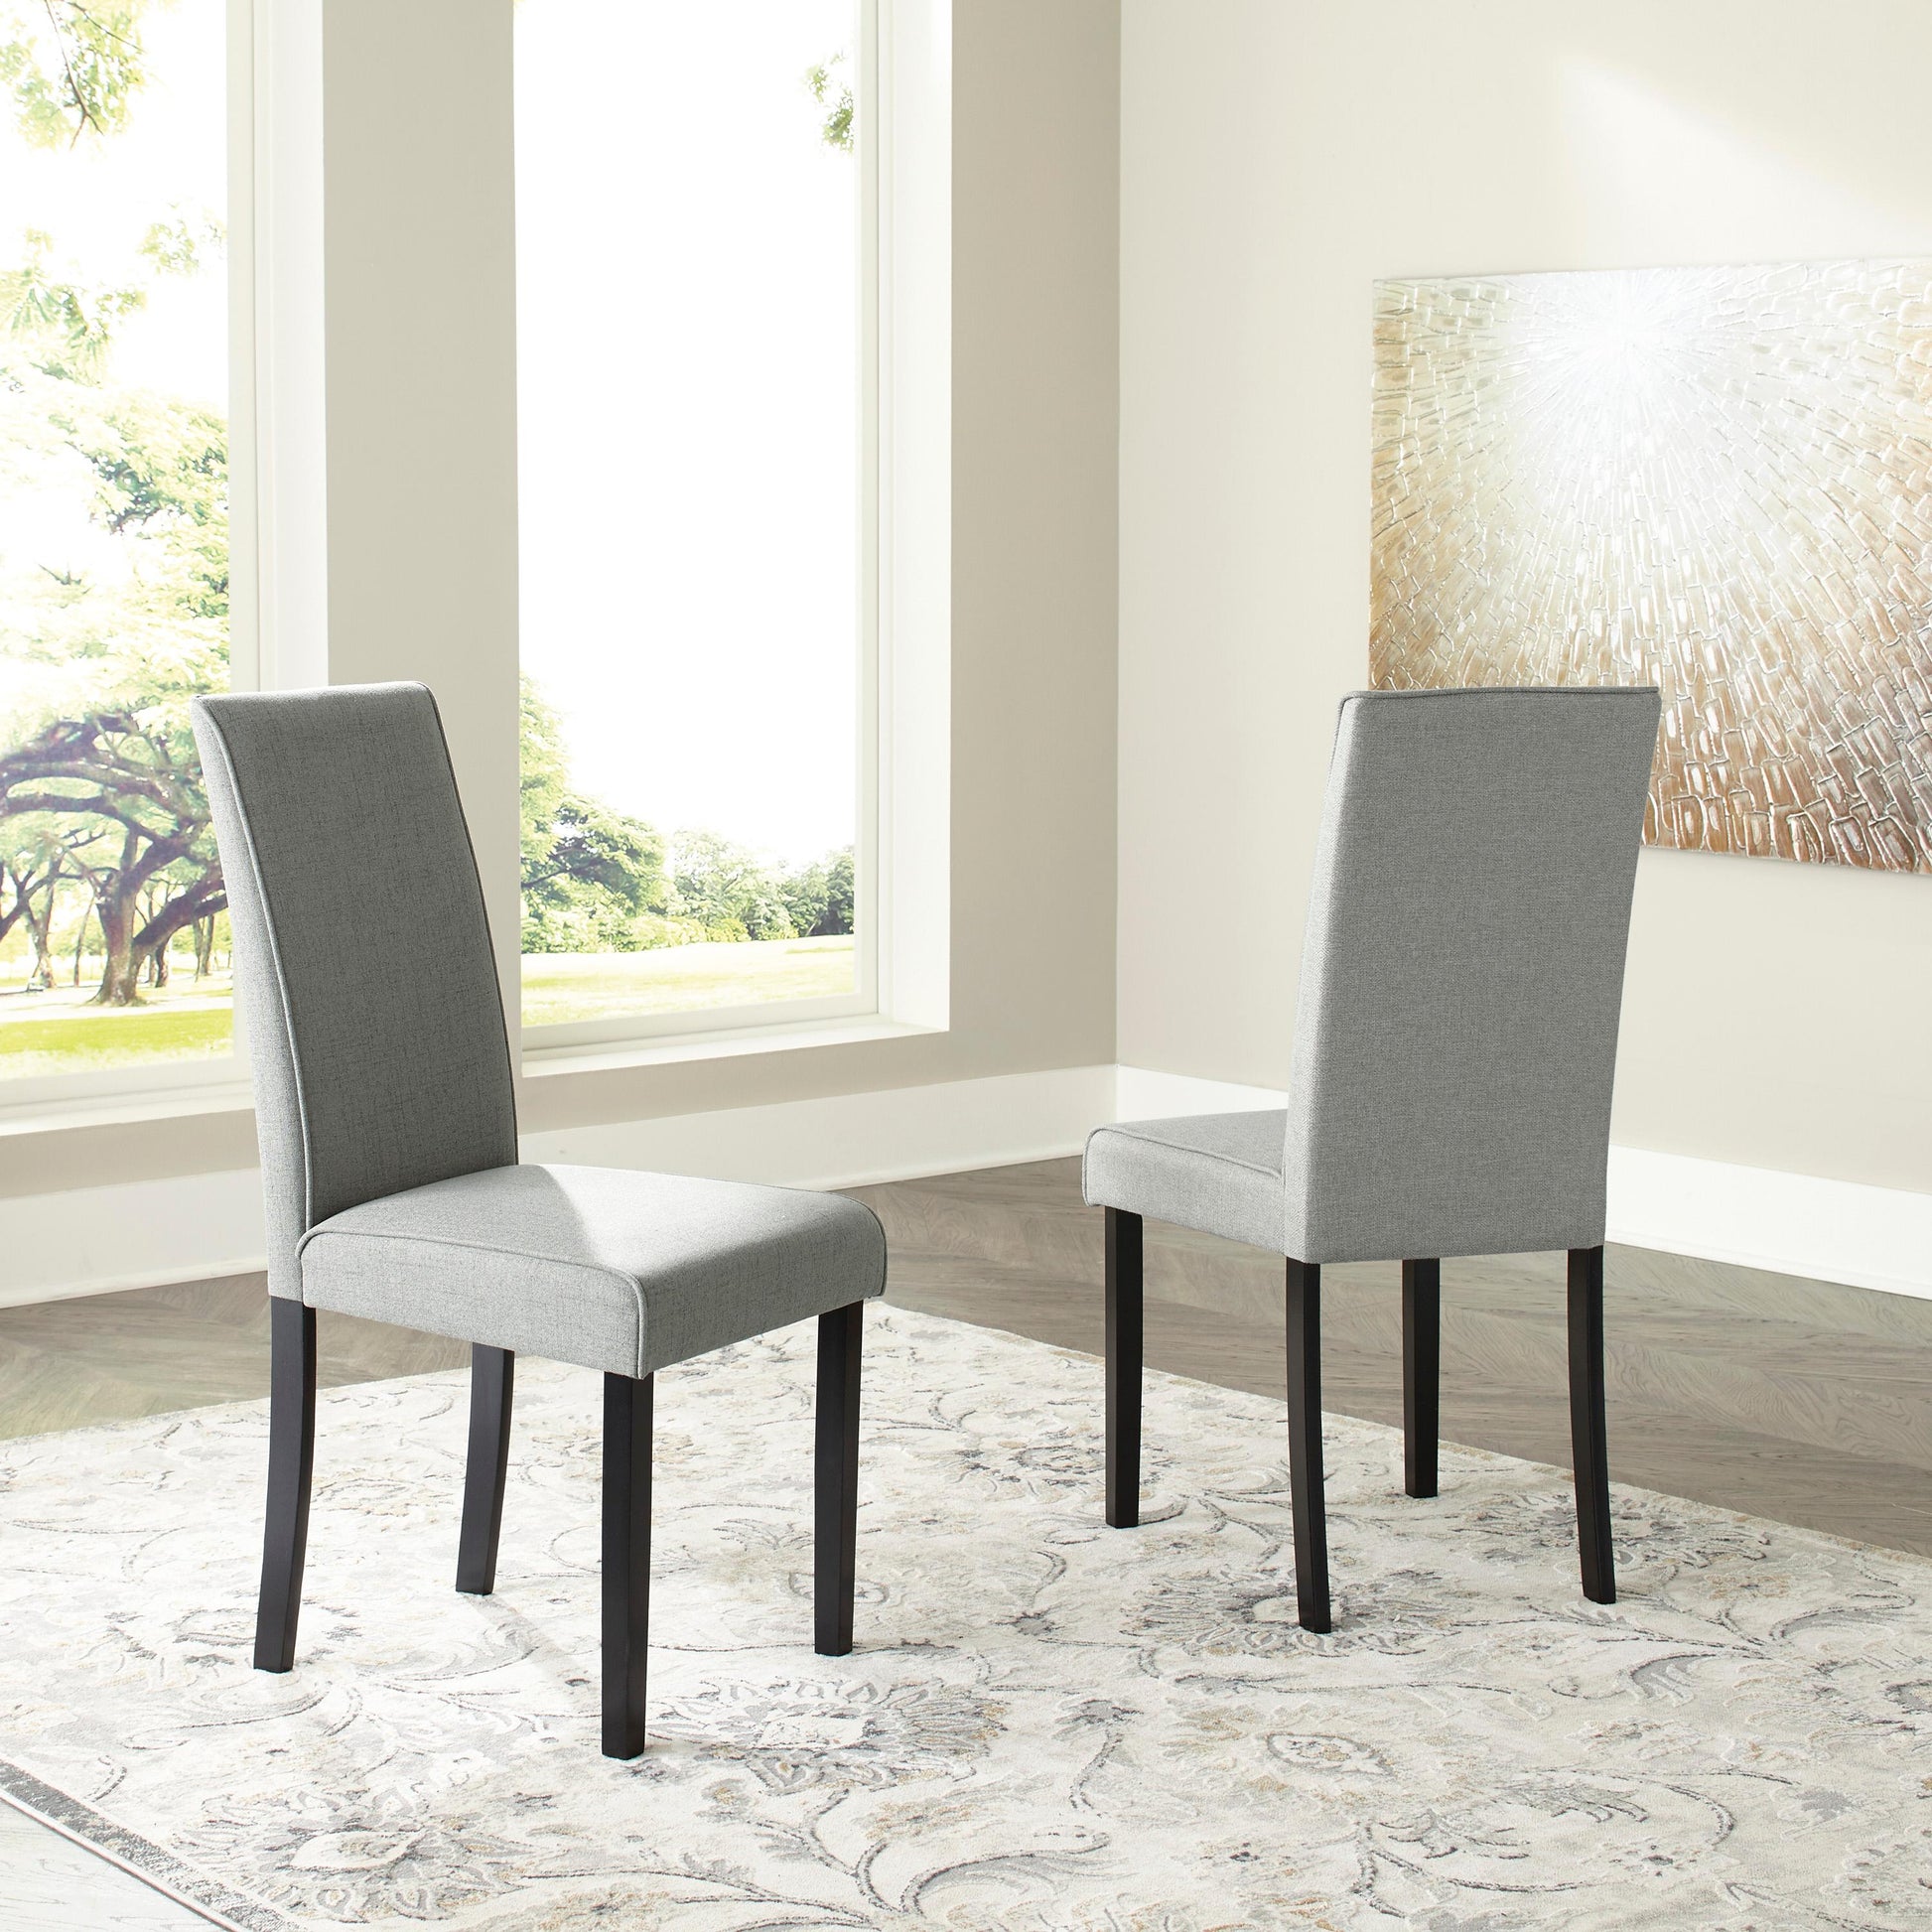 Signature Design by Ashley Kimonte Dining Chair D250-06